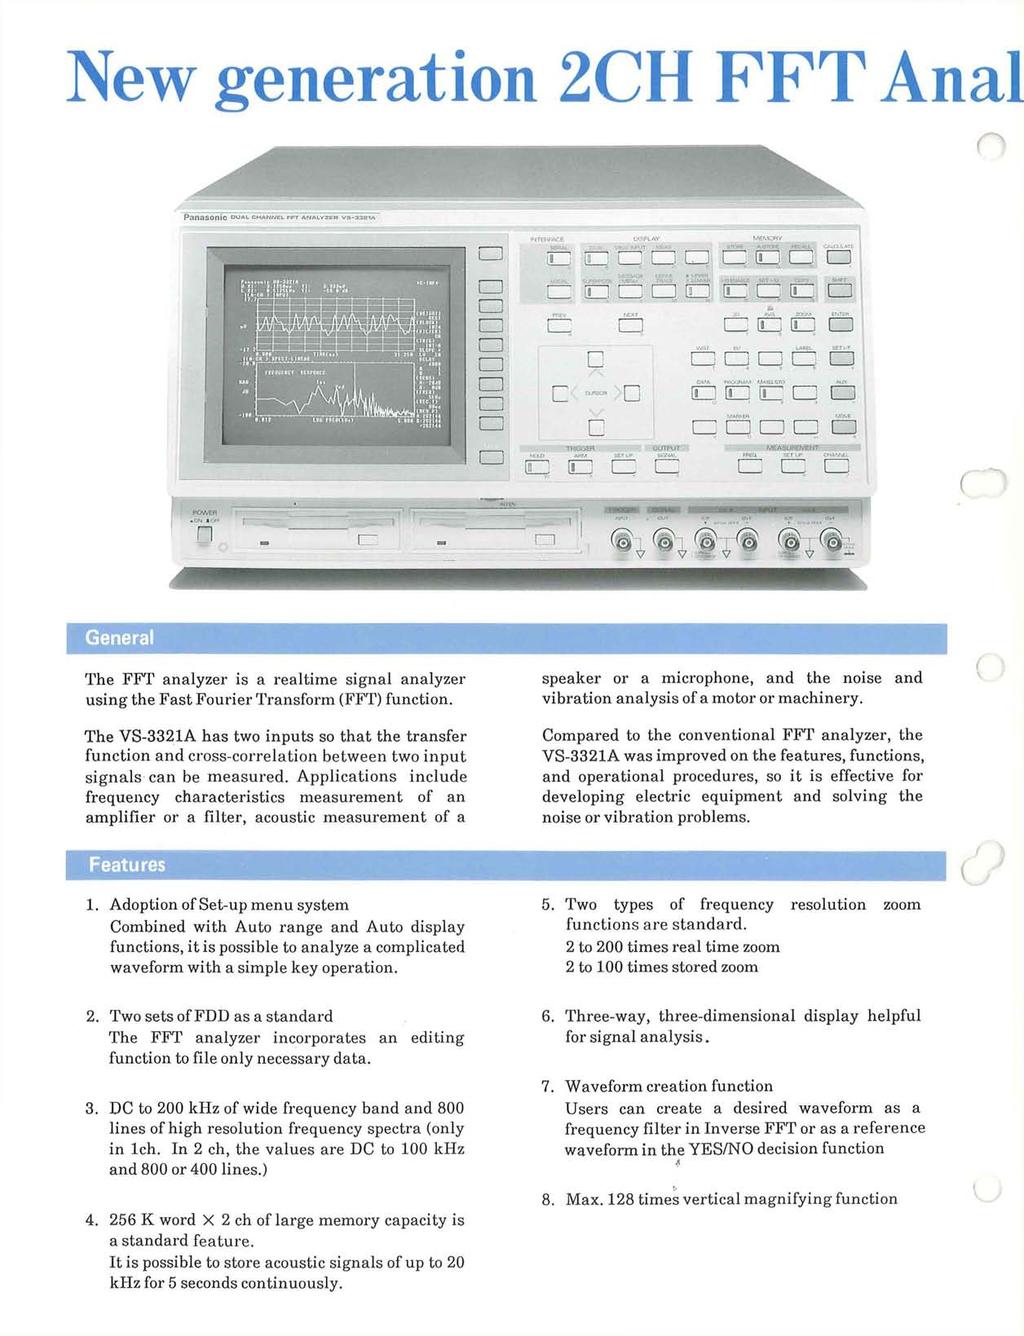 New generation 2CH FFT Anal General The FFT analyzer is a realtime signal analyzer using the Fast Fourier Transform (FFT) function.